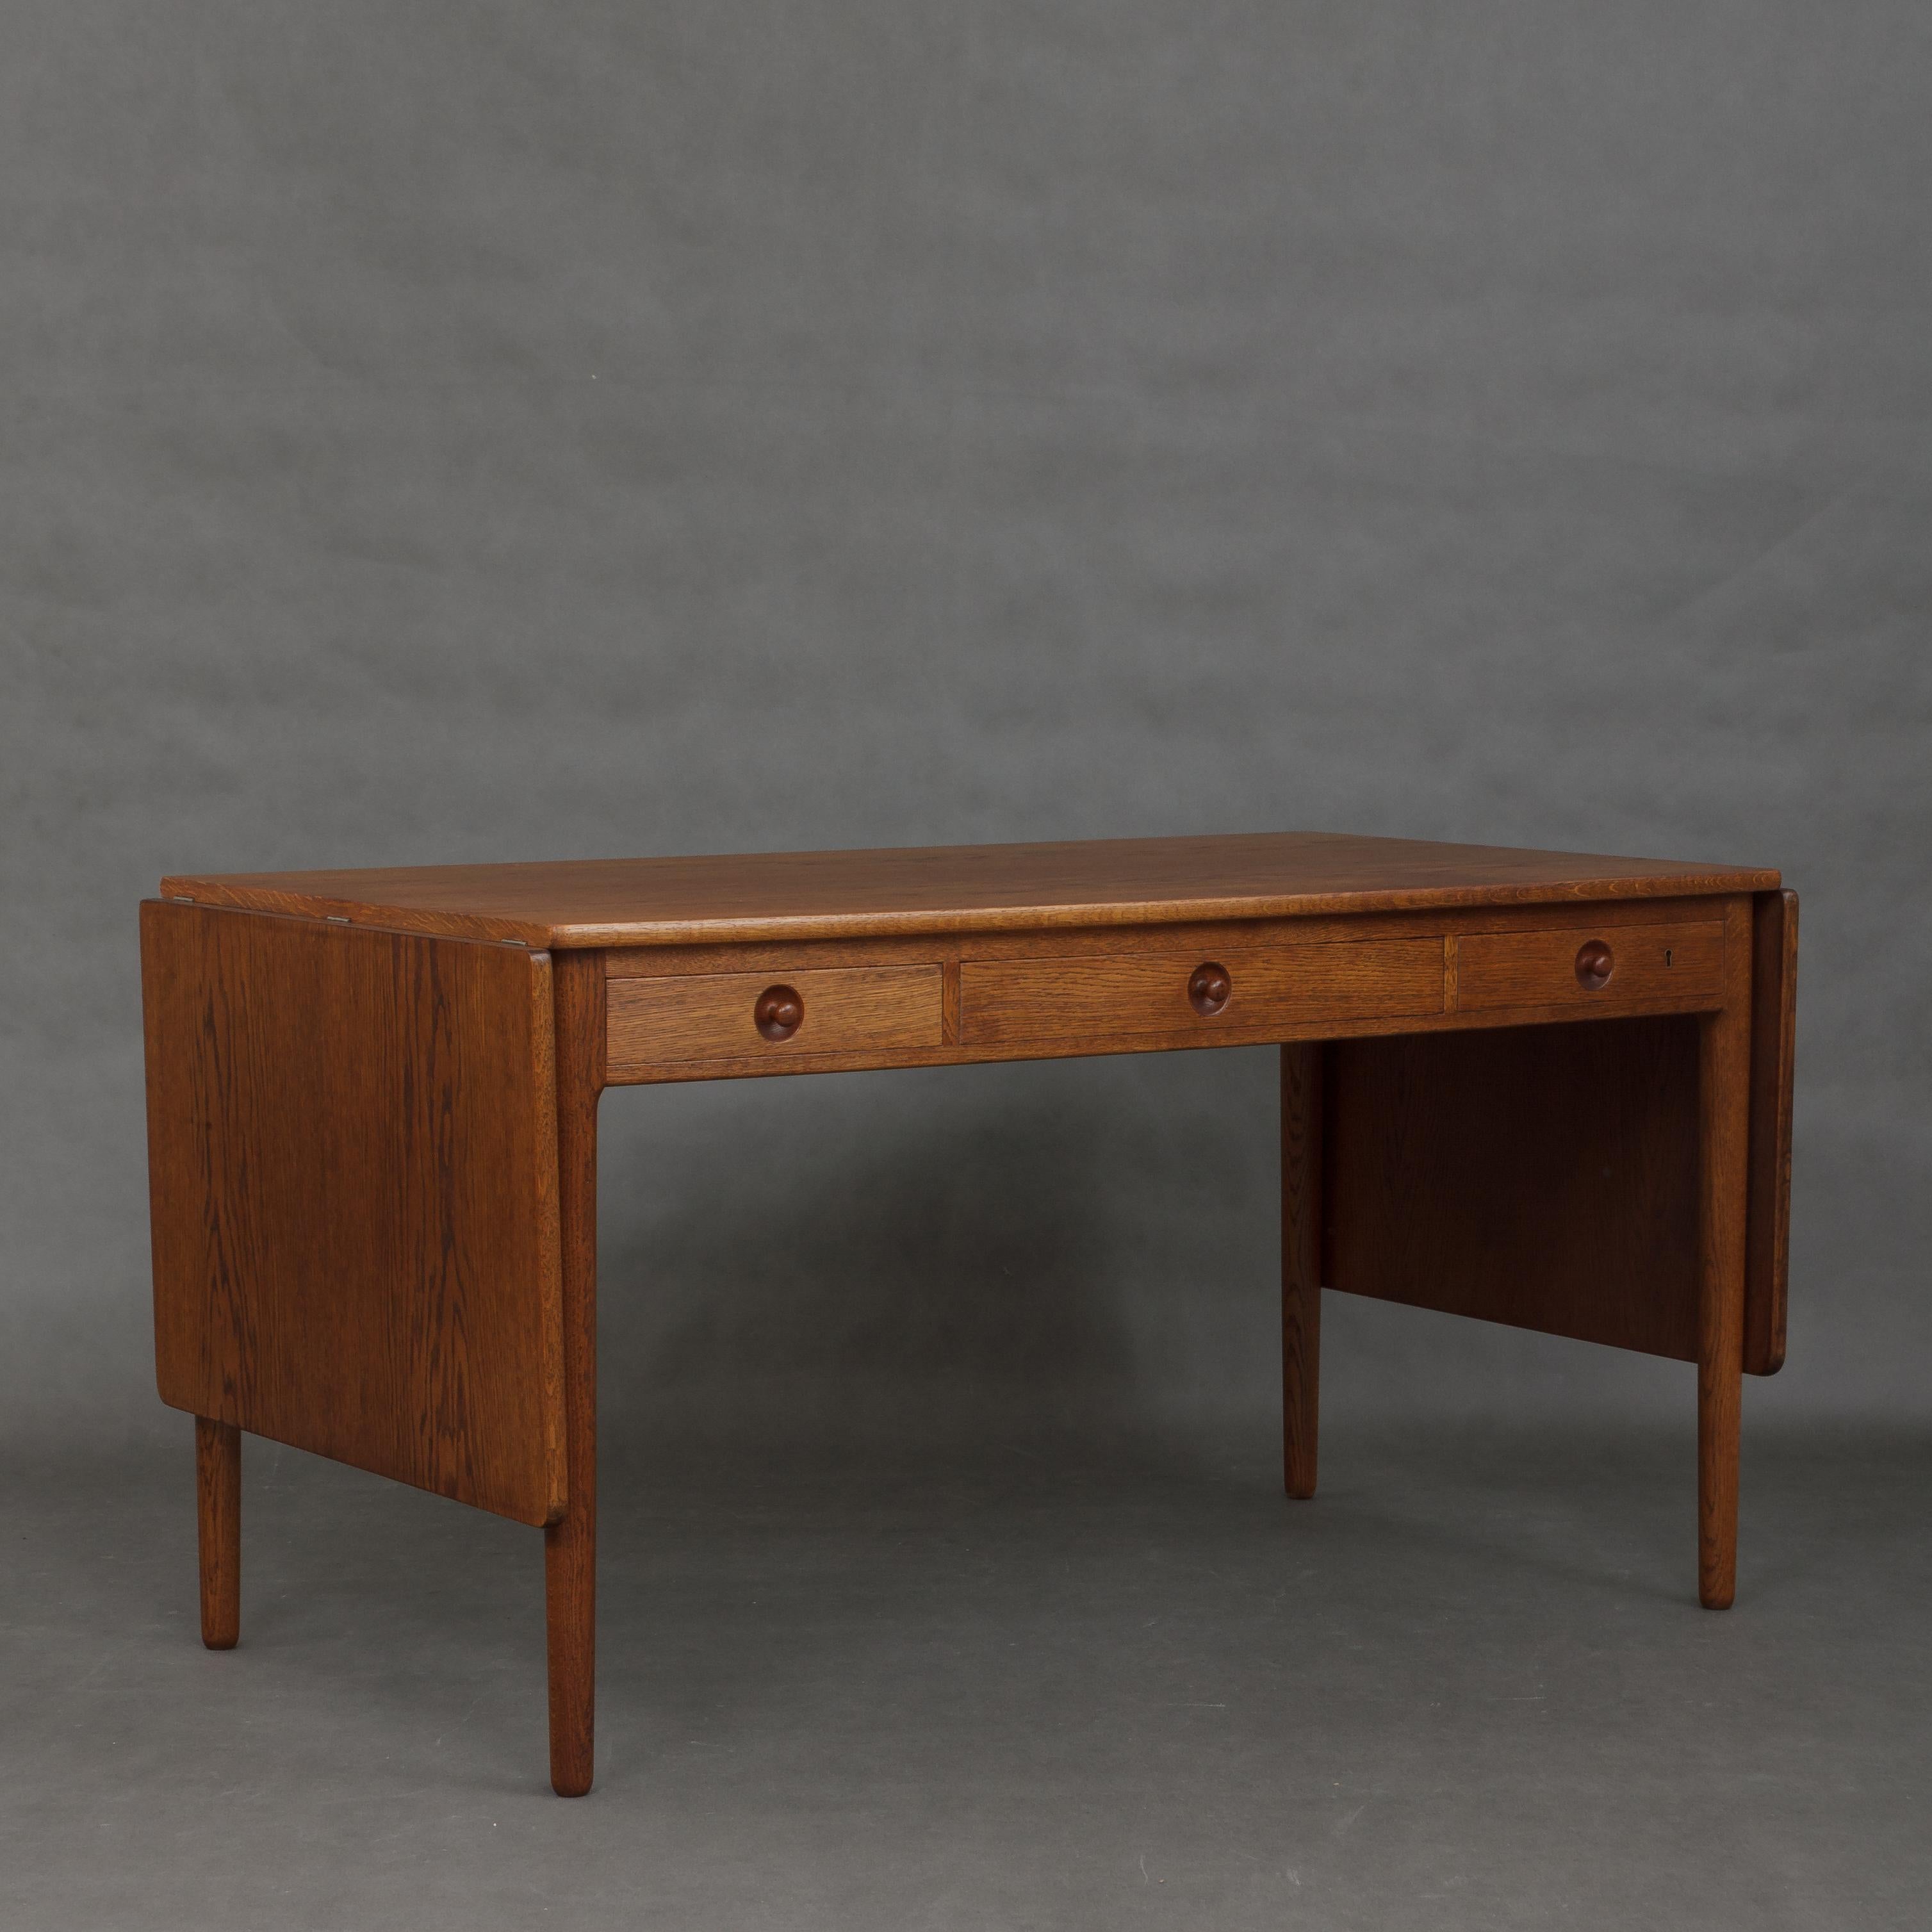 Designed in 1955 by Hans Wegner and manufactured by Andreas Tuck, this solid oak desk has two side leaves (55cm long each) with underneath support and three very deep drawers with organizers. Full length 246cm. This model comes from 1965y. And is in